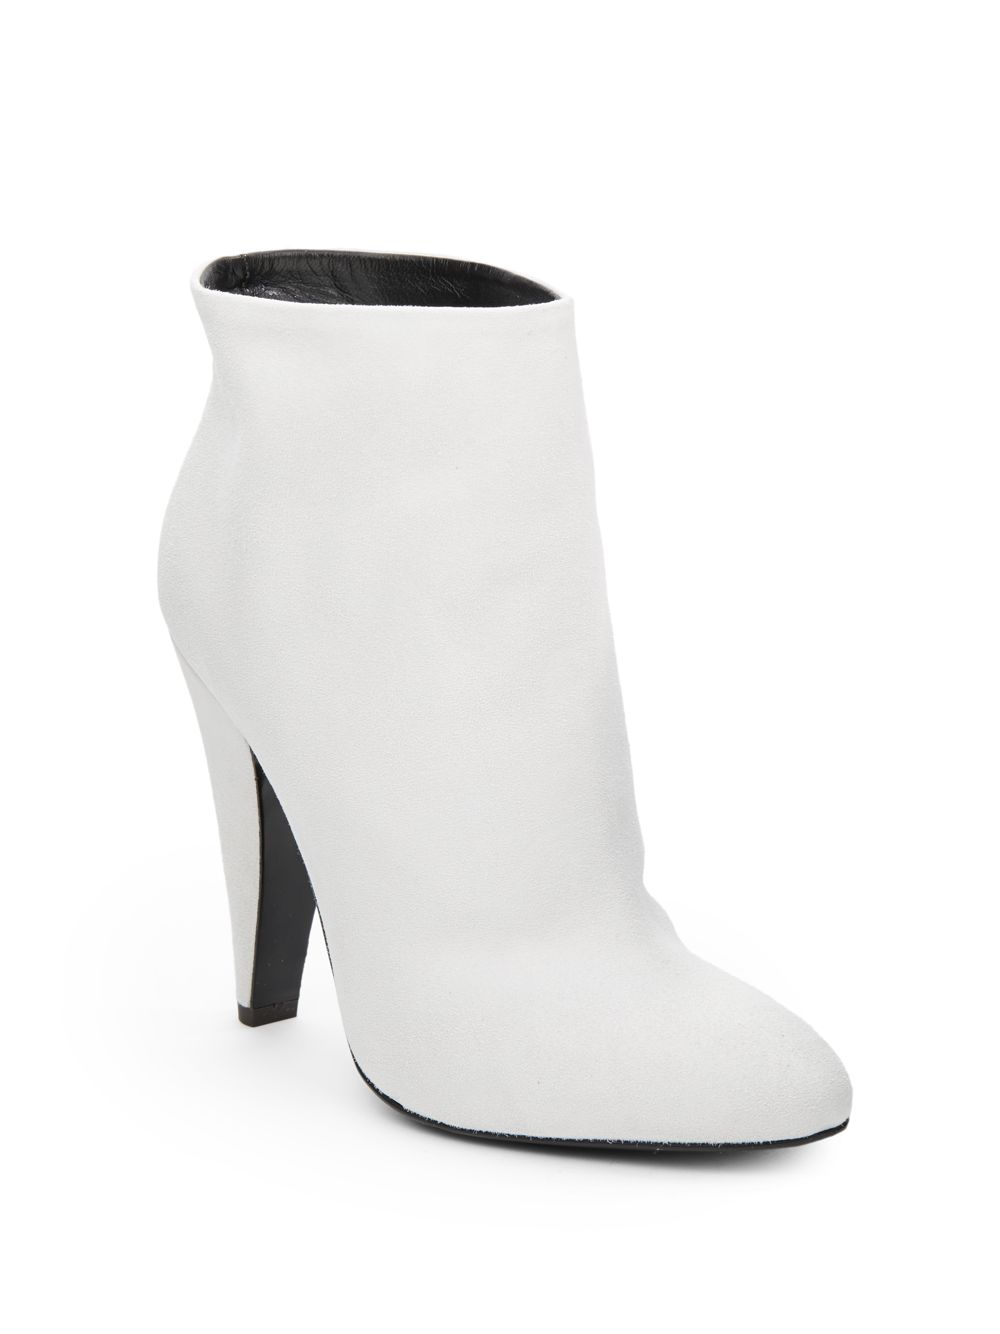 Lyst - Giuseppe Zanotti Suede Ankle Boots in White